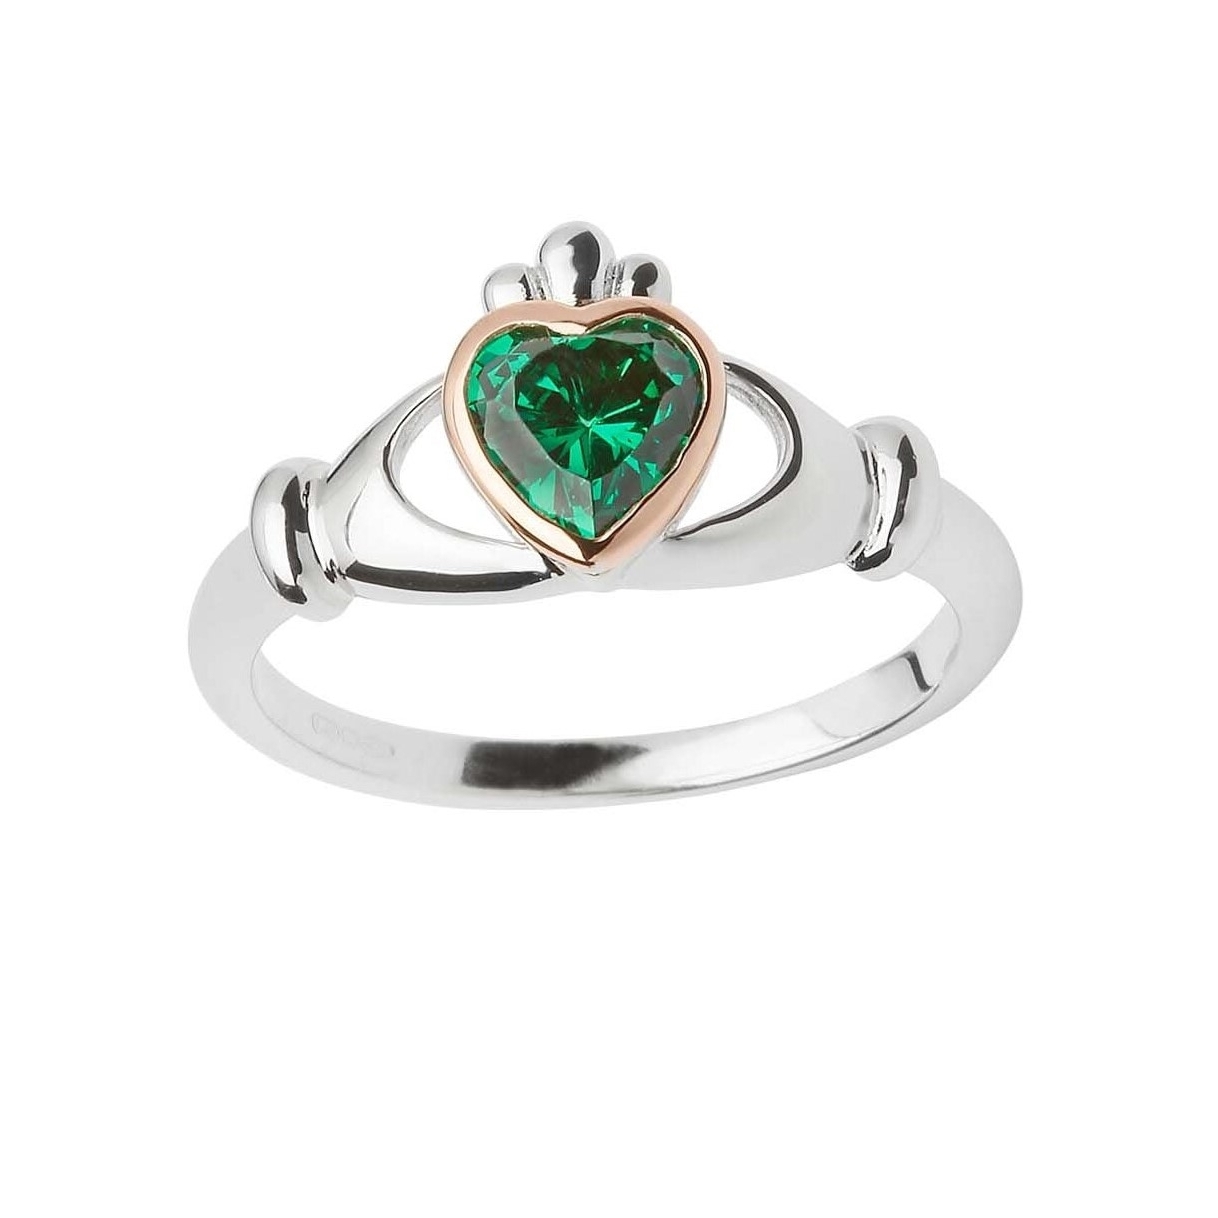 Amazon.com: Irish Claddagh Ring 925 Sterling Silver | Gold Tone Claddagh  Engagement Ring Heart Shape Simulated Emerald Green Stone SR797 (3):  Clothing, Shoes & Jewelry